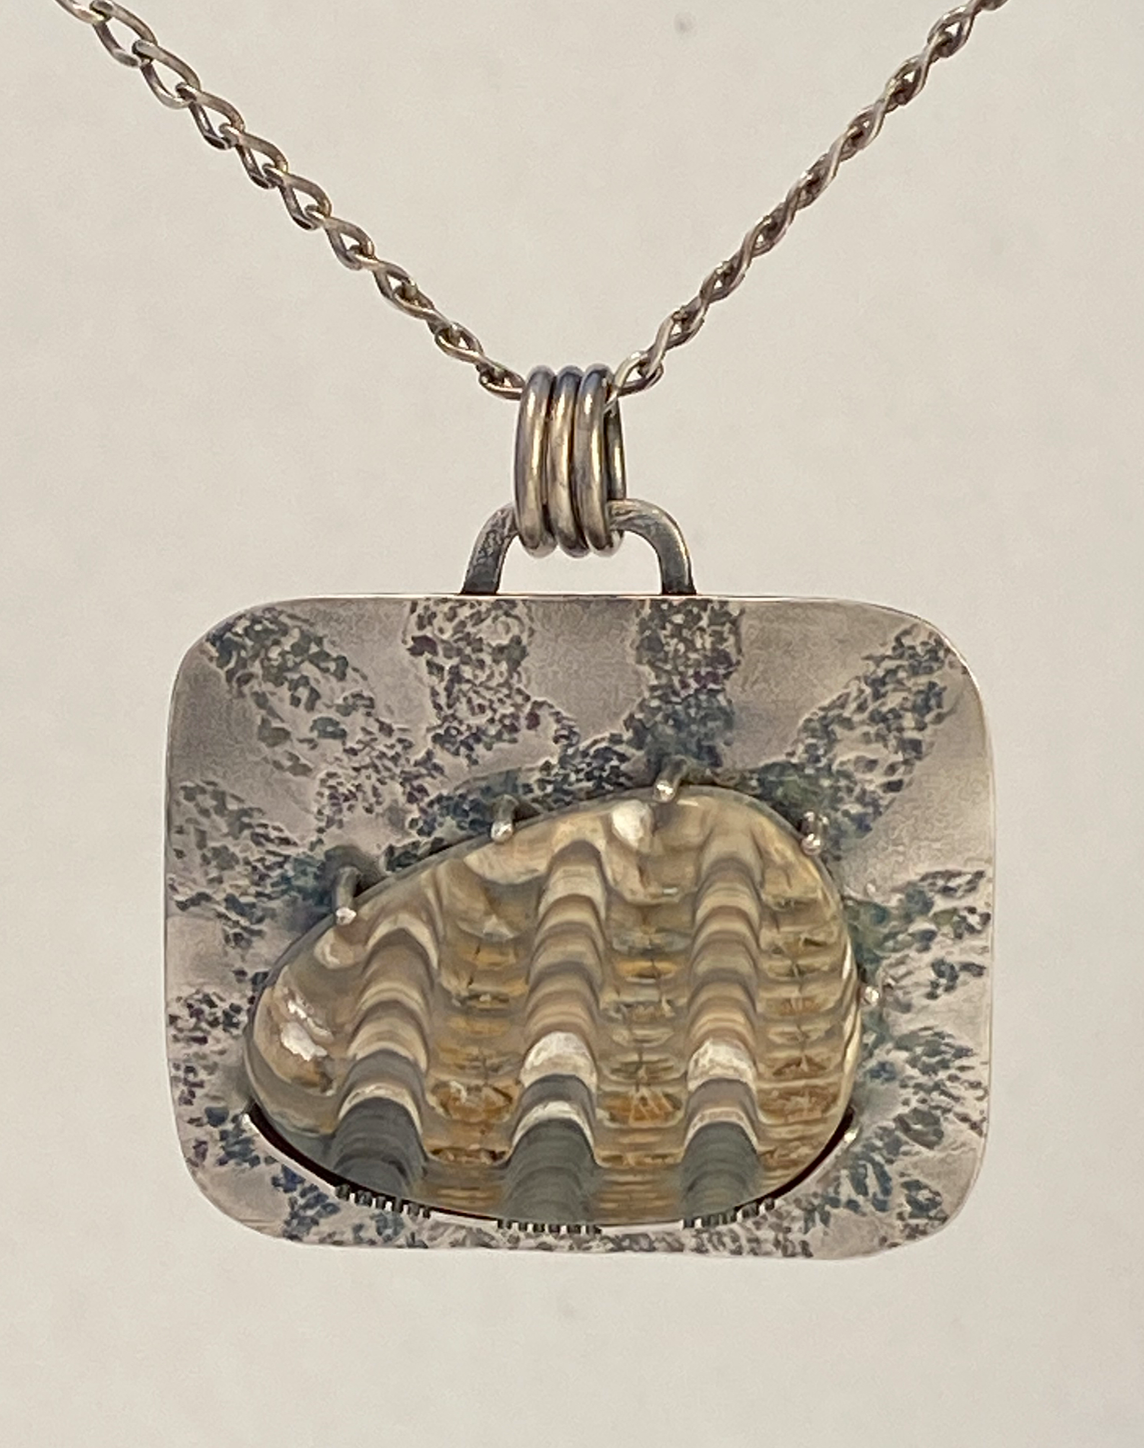 At the heart of this sterling silver piece is beautiful Anadara stone, an ancient fossilized sea shell.  There is a lace pattern pressed into the metal back plate, simulating a sunrise  19" sterling silver chain with a handcrafted clasp. Just over 1” tall and about 1.5” wide.  Style: rustic, boho, funky, organic, earthy yet elegant